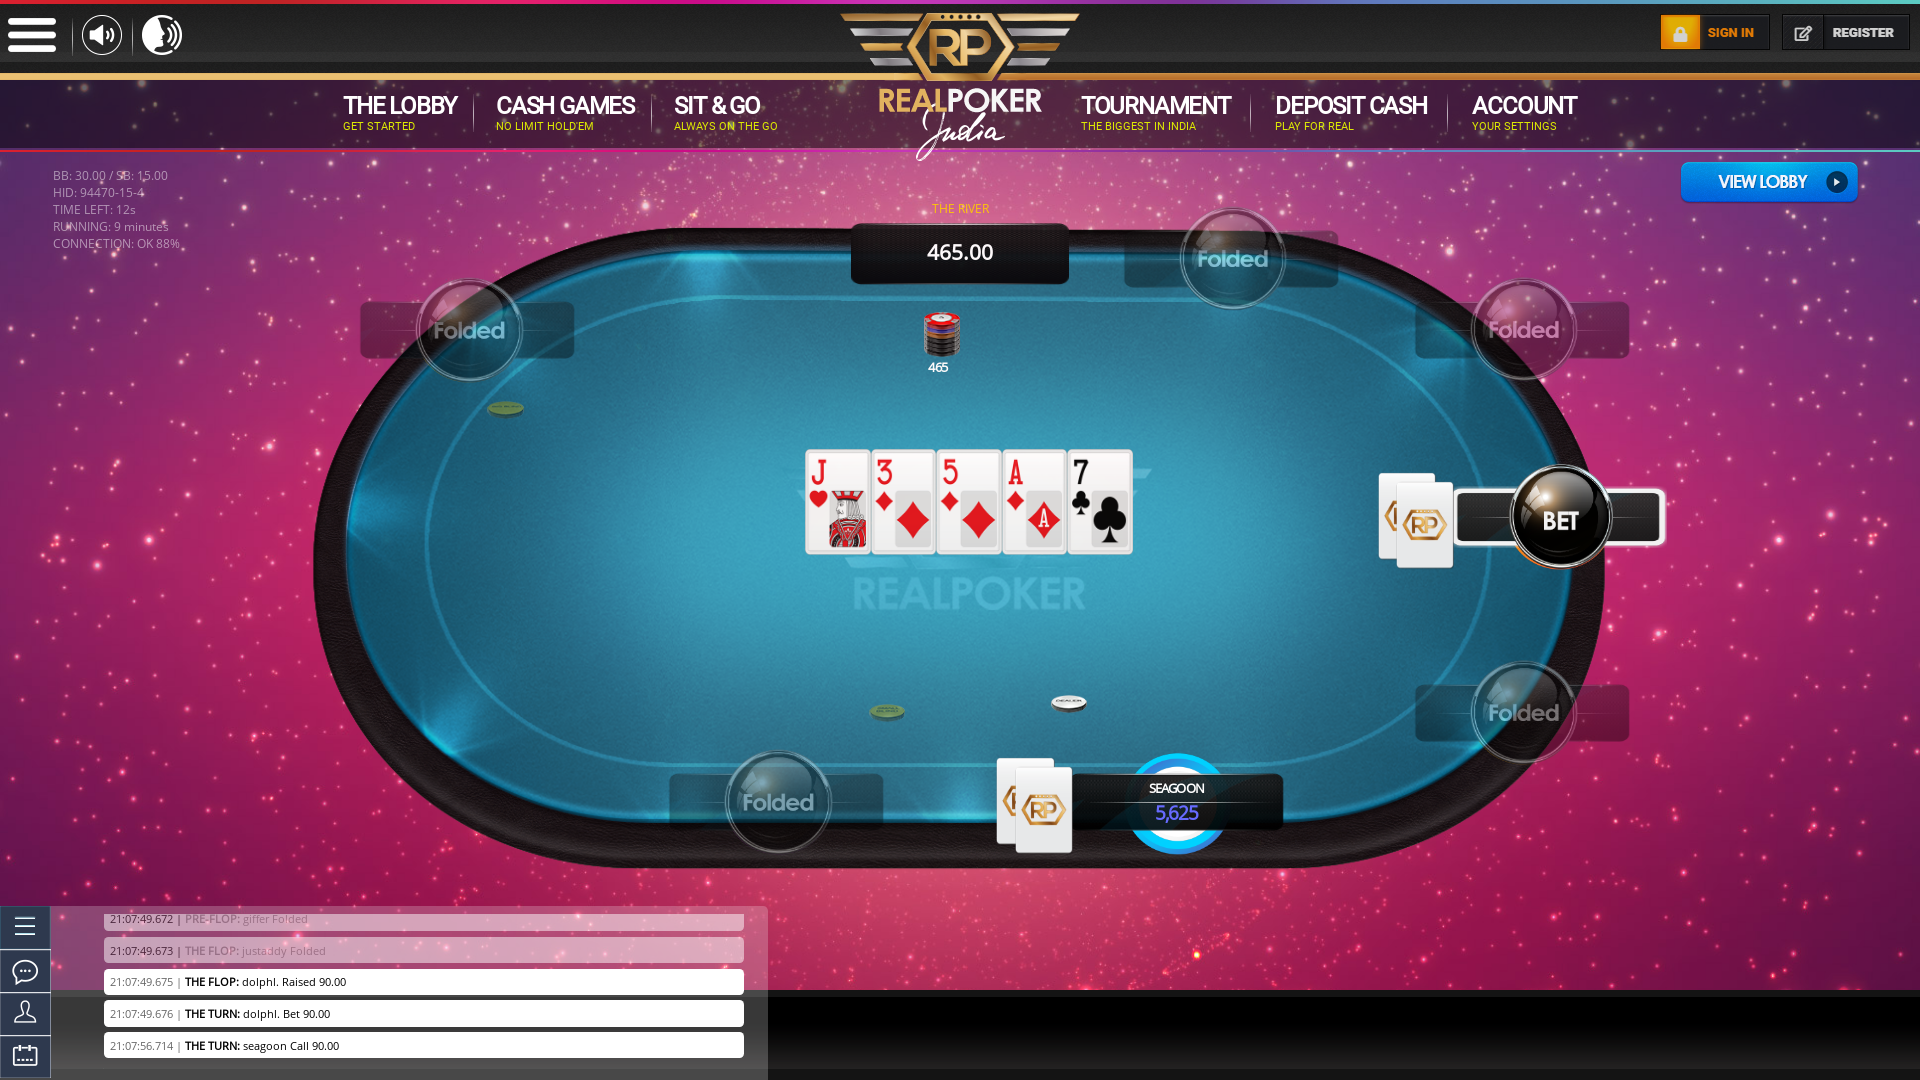 Online poker on a 10 player table in the 8th minute match up